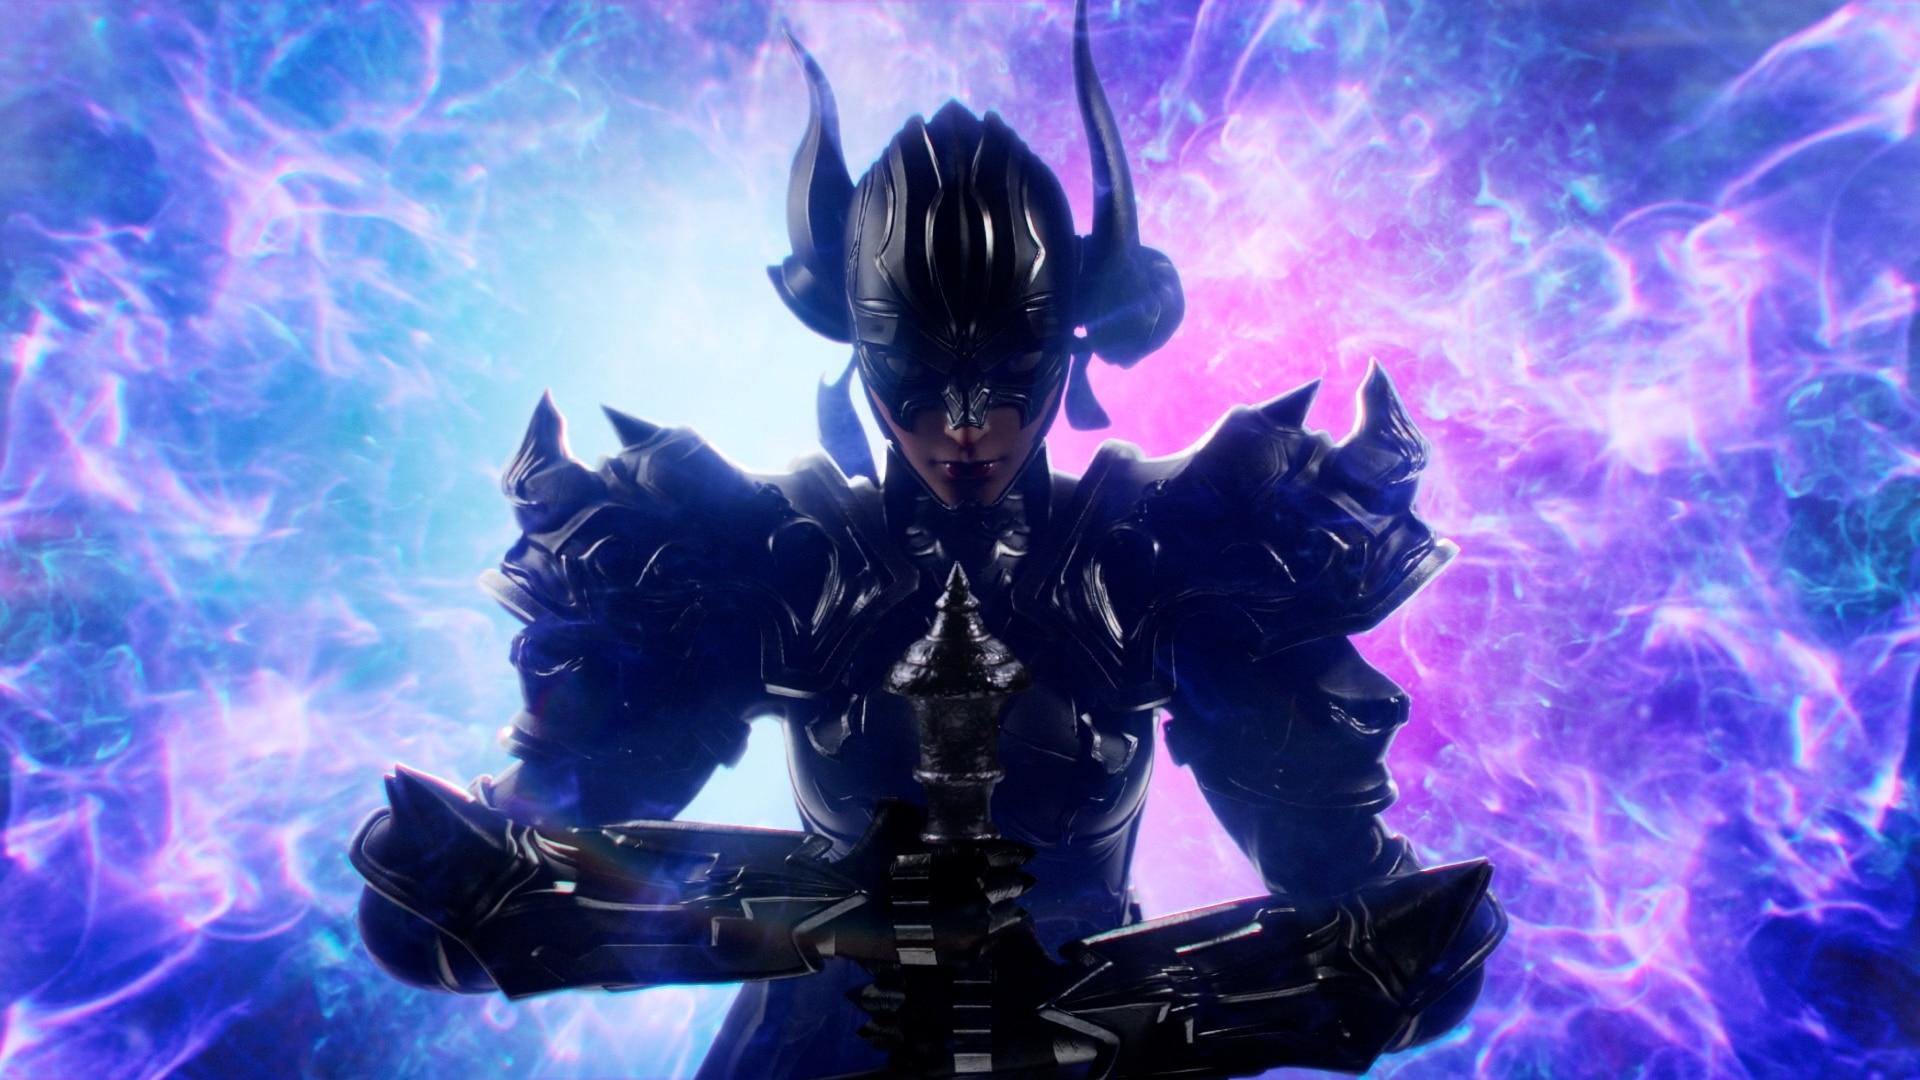 FINAL FANTASY XIV ONLINE REVEALS NEW TRAILER FOR PATCH 6.3 AND